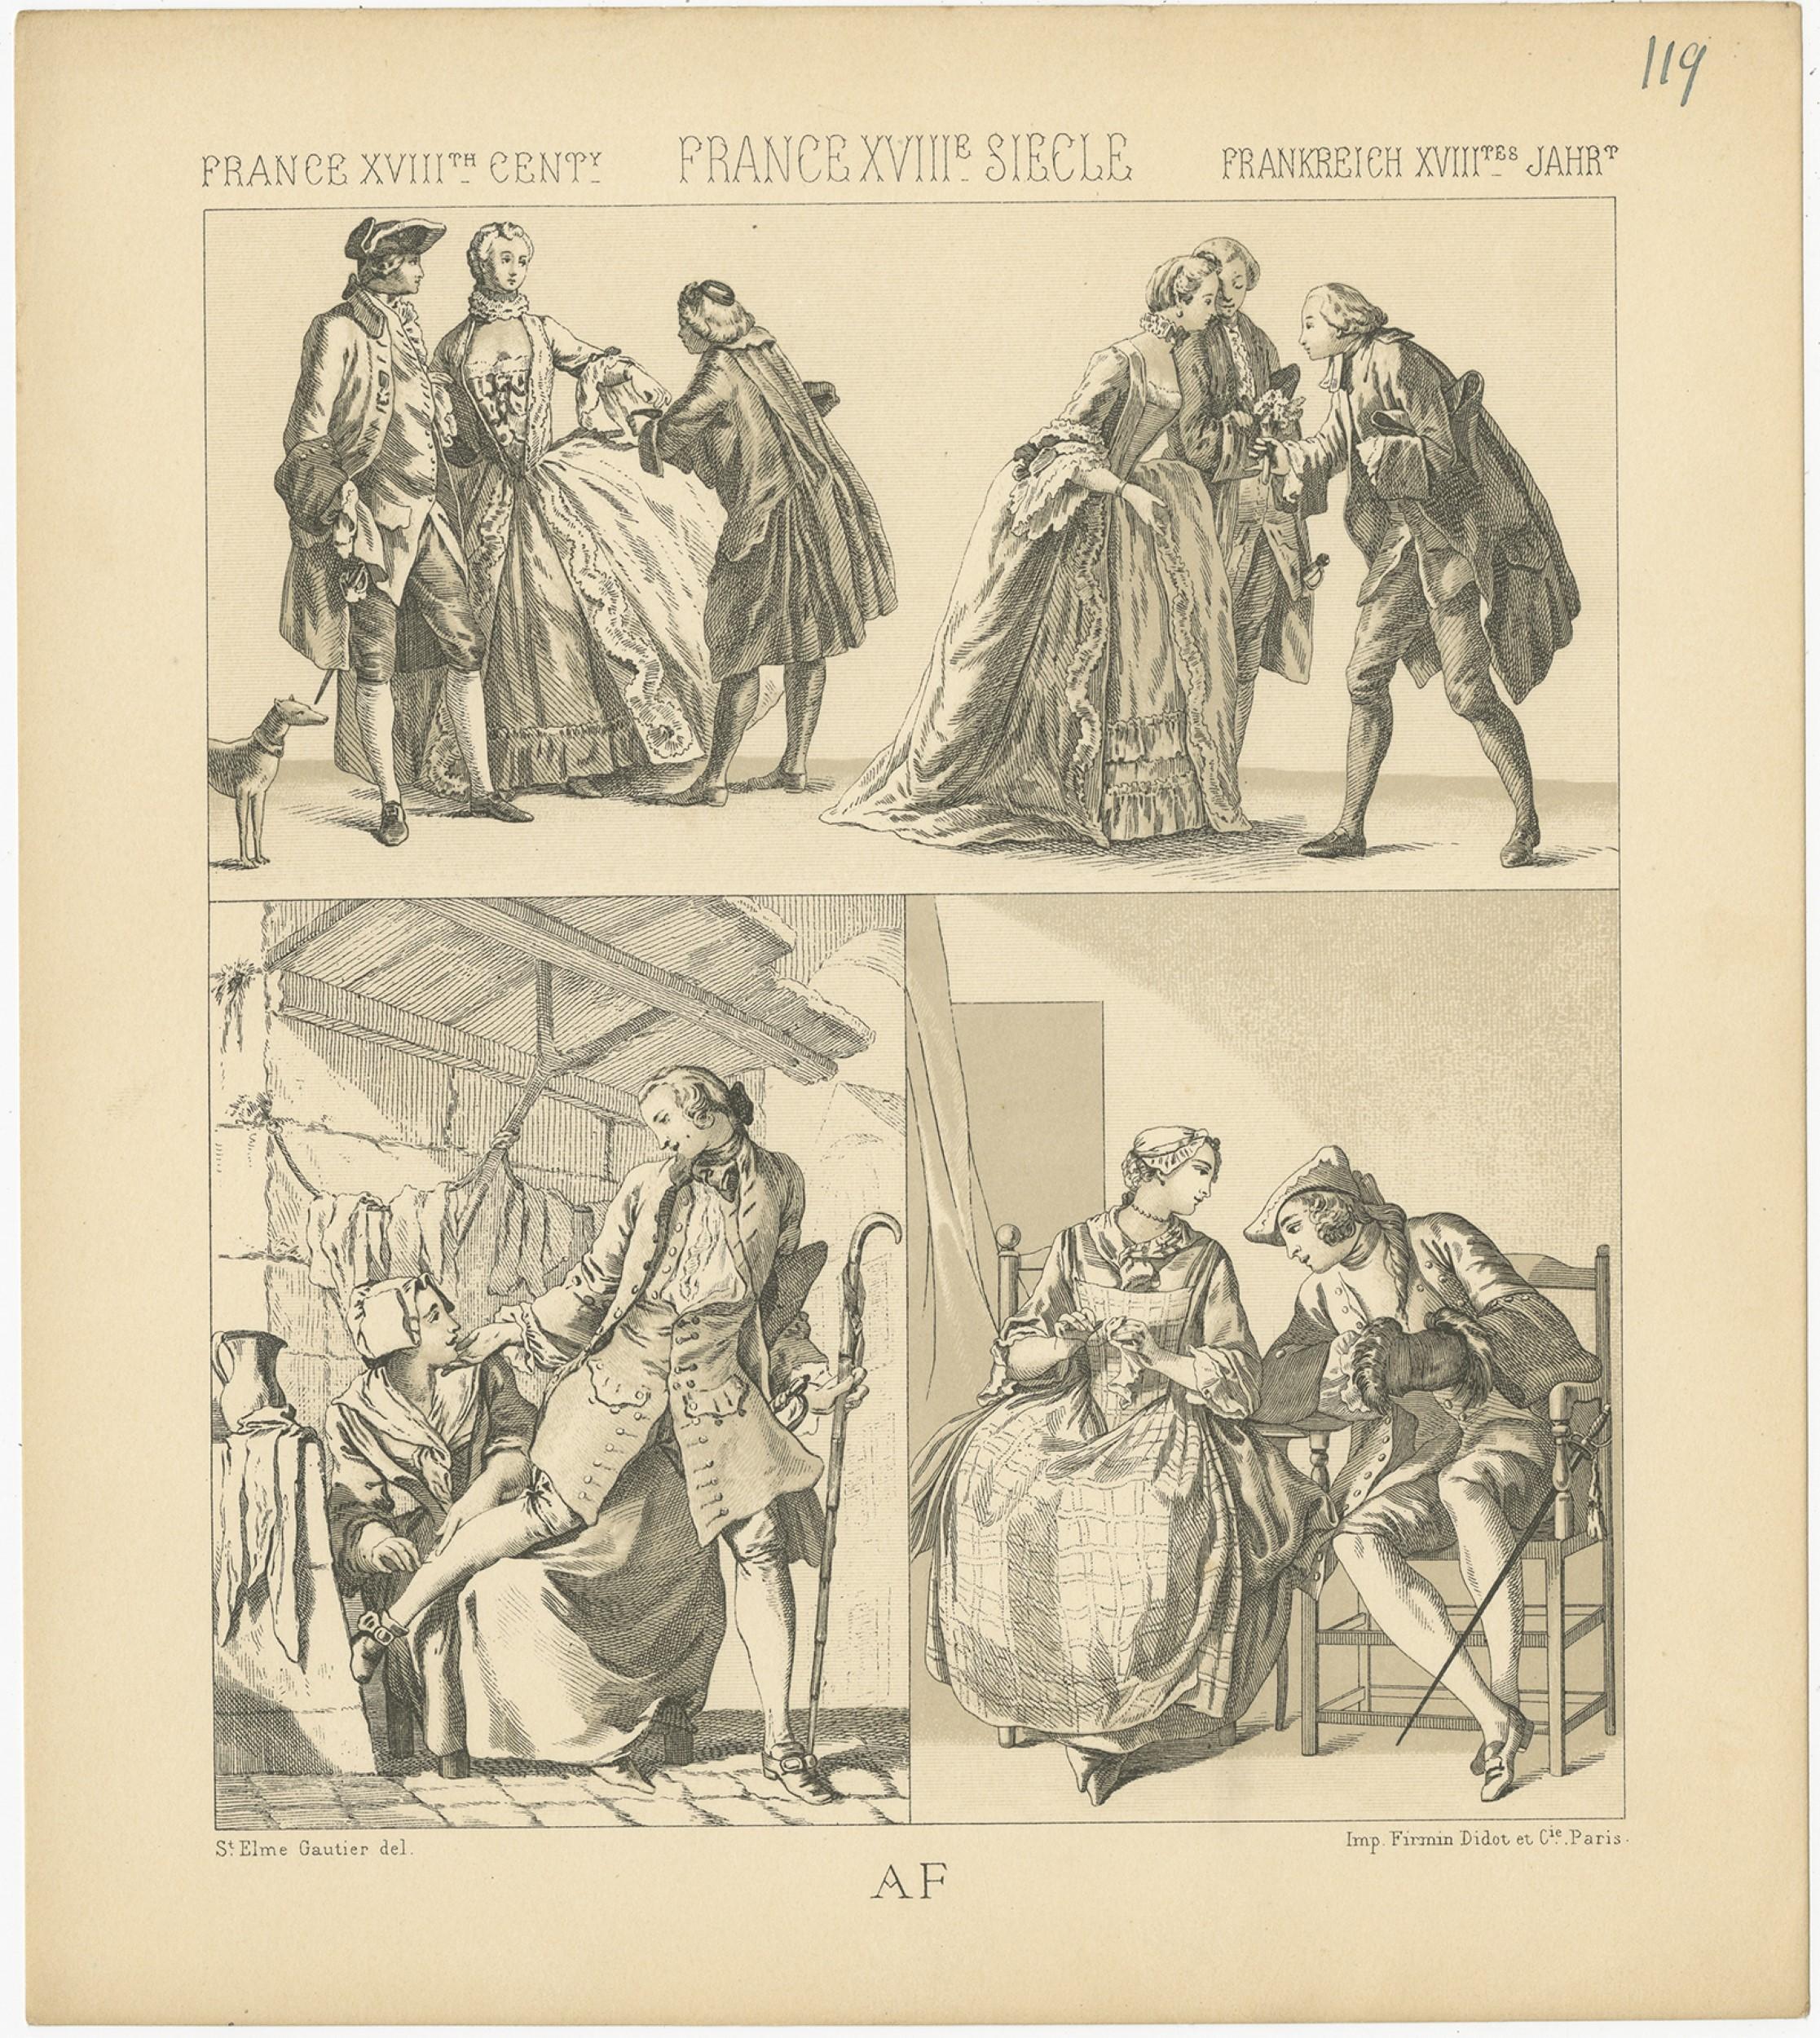 Antique print titled 'France XVIIIth Cent - France XVIIIe, Siecle - Frankreich XVIIItes Jahr'. Chromolithograph of French 18th century costumes. This print originates from 'Le Costume Historique' by M.A. Racinet. Published, circa 1880.

  